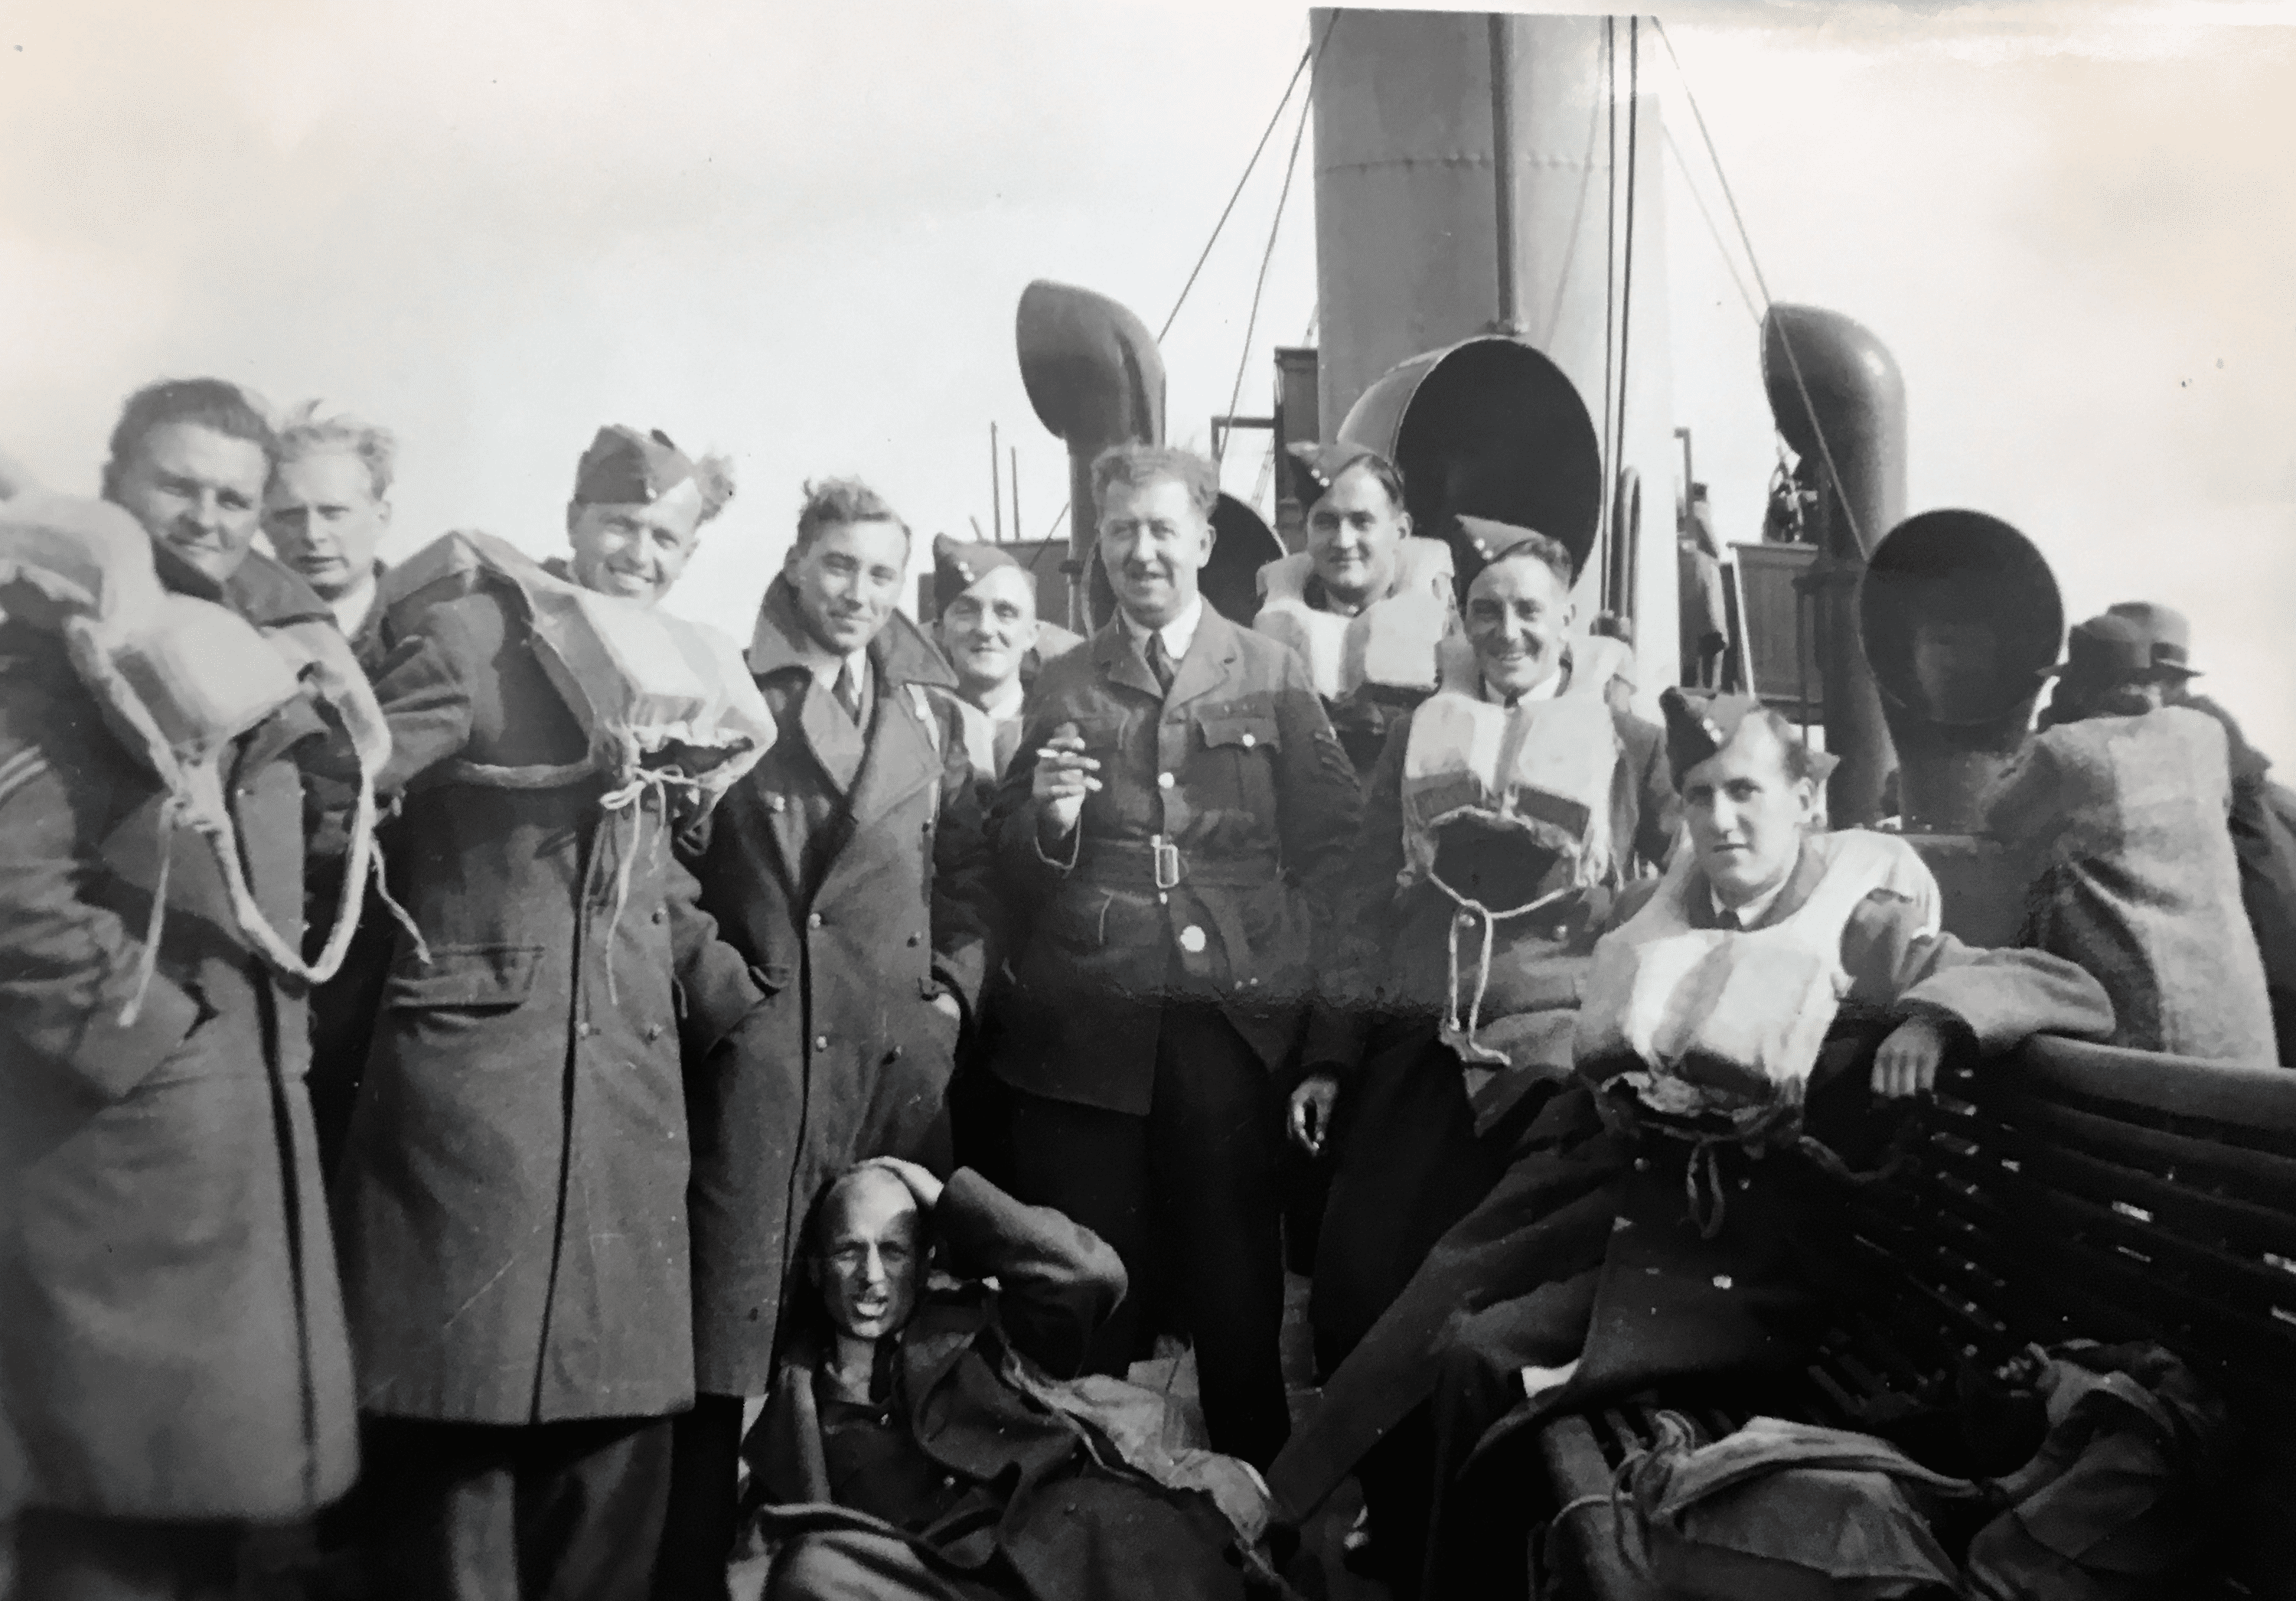 Service men aboard Scillonian I during WW2